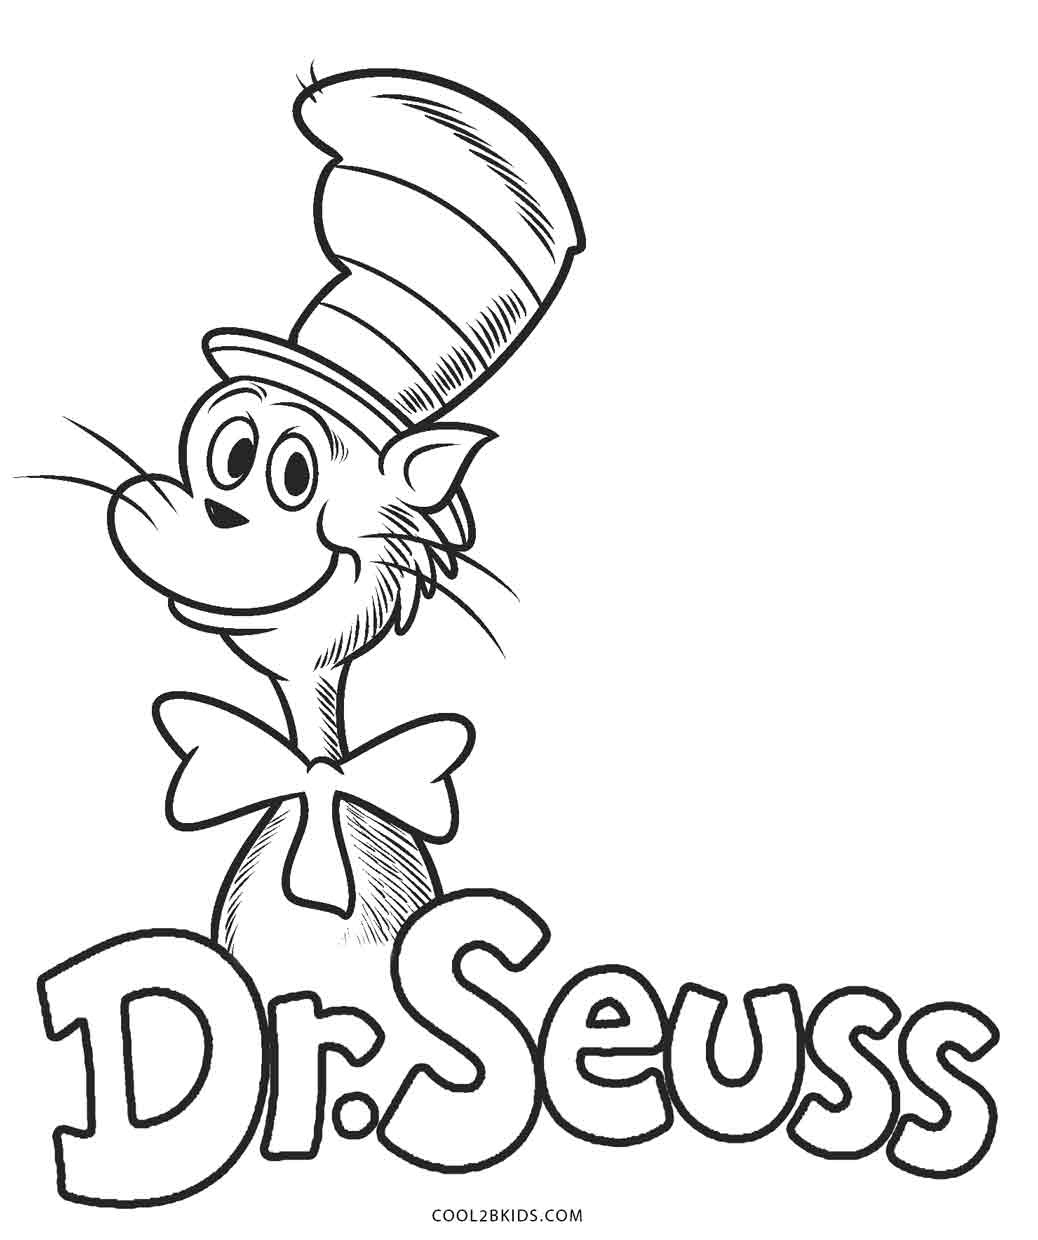 Free Printable Dr Seuss Coloring Pages For Kids | Cool2Bkids - Free Dr Seuss Characters Printables